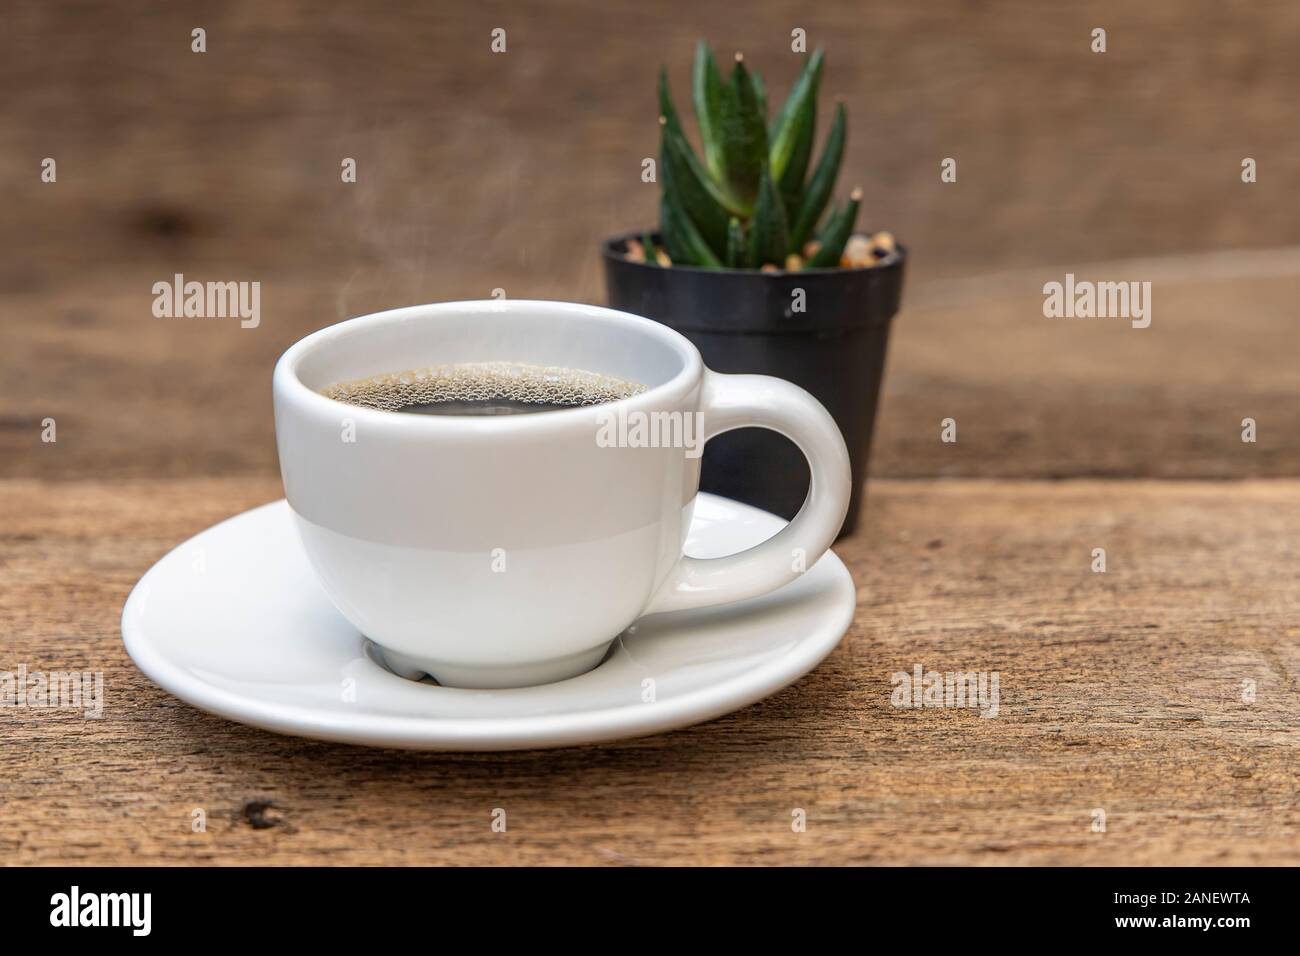 A white cup of coffee on the wooden table background. Stock Photo